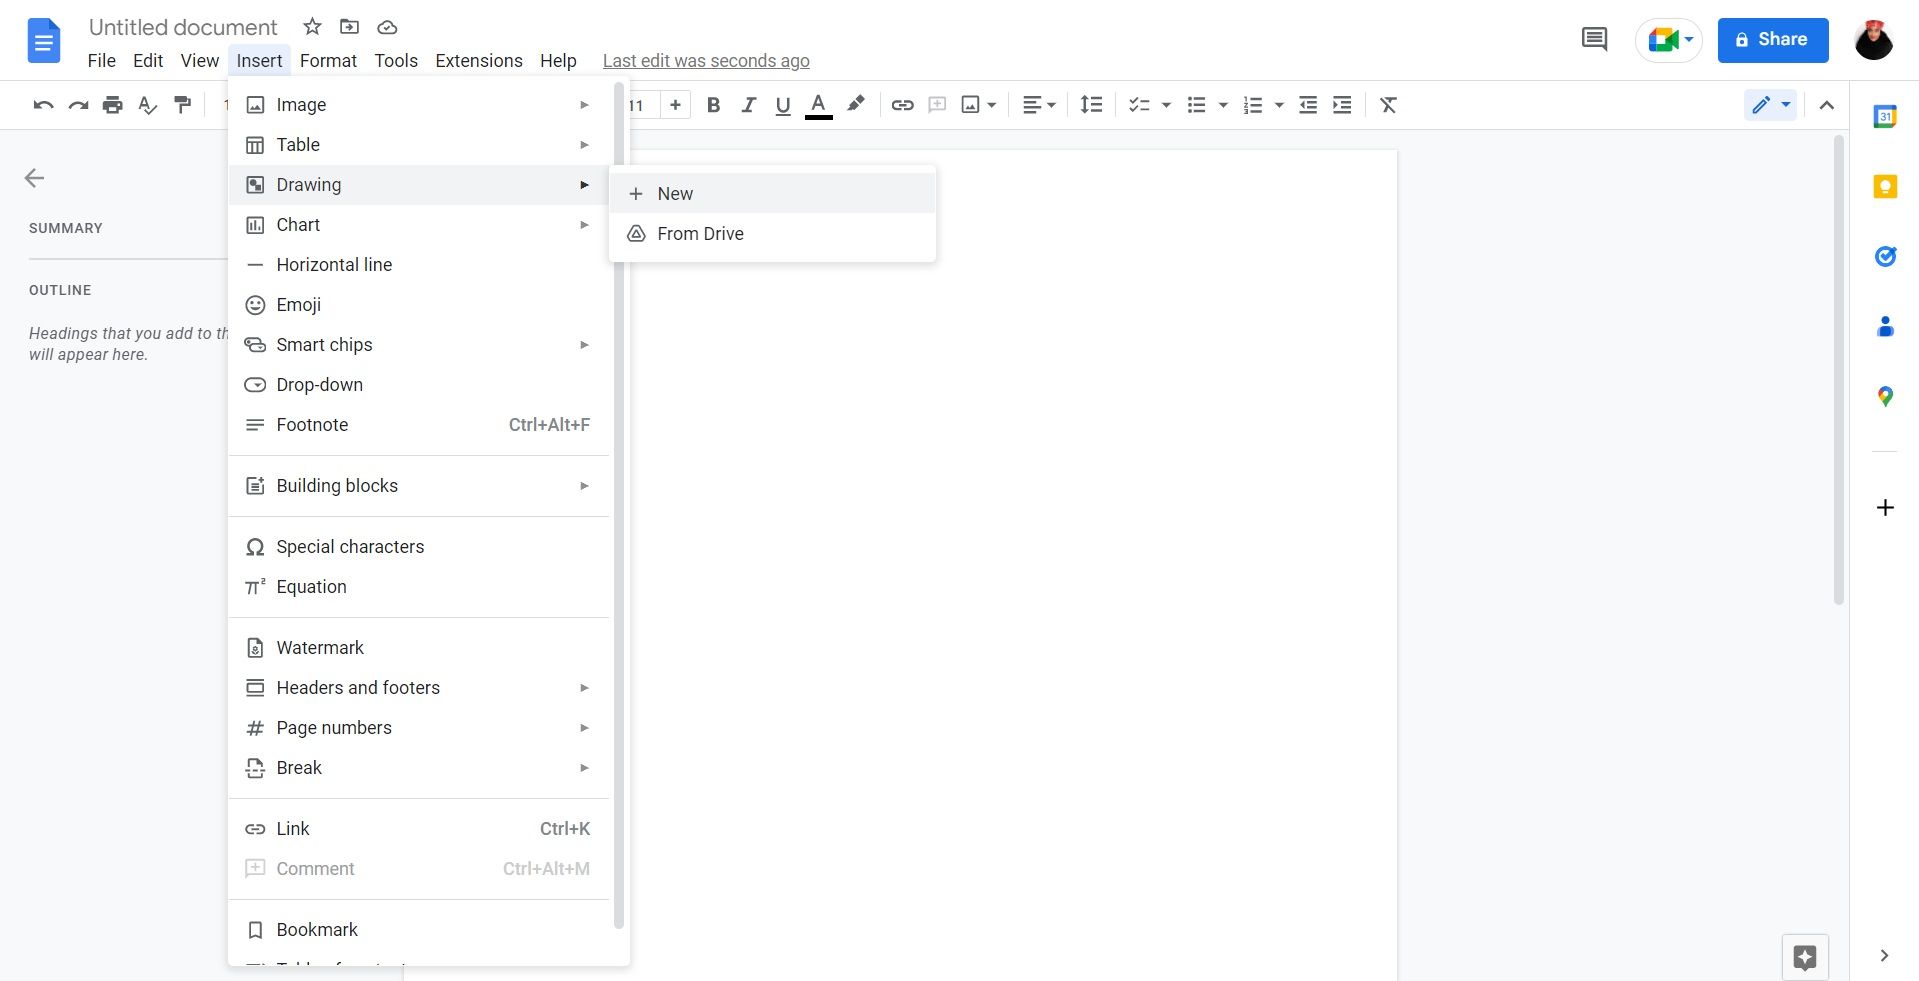 Clicking on the Drawing option from the Insert menu in Google Docs